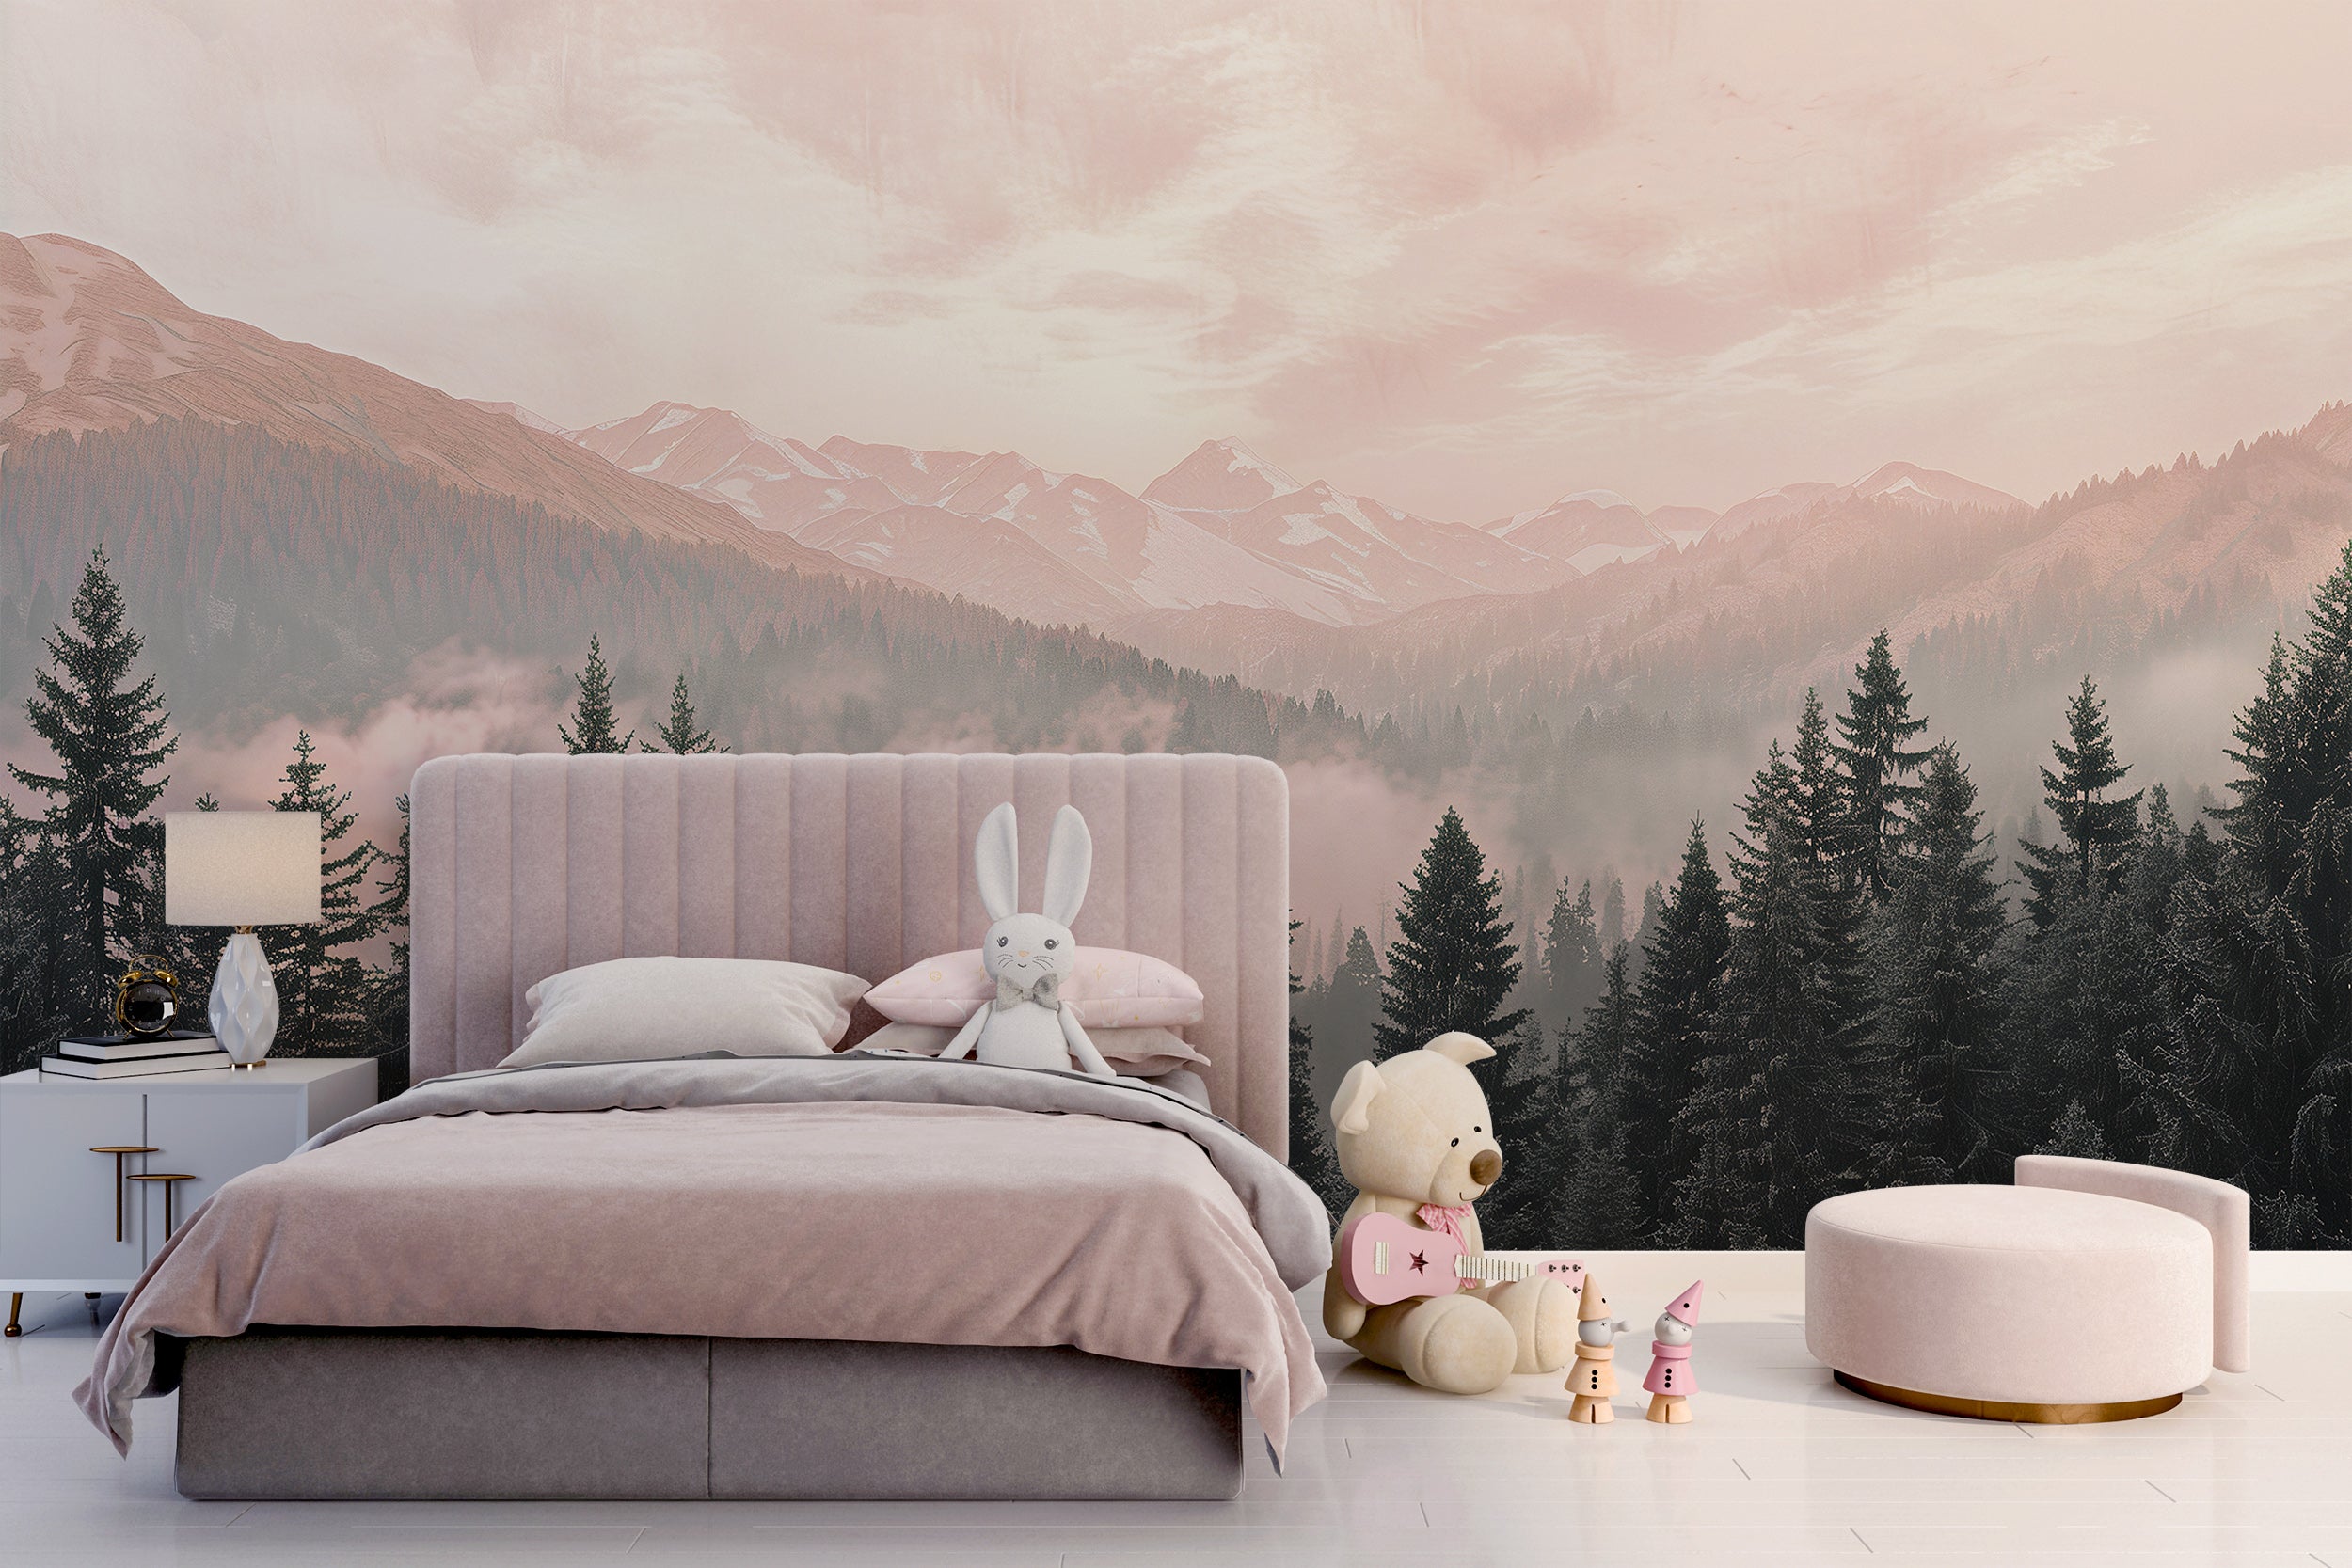 Nursery mountain and forest mural Peel and stick foggy nature wallpaper